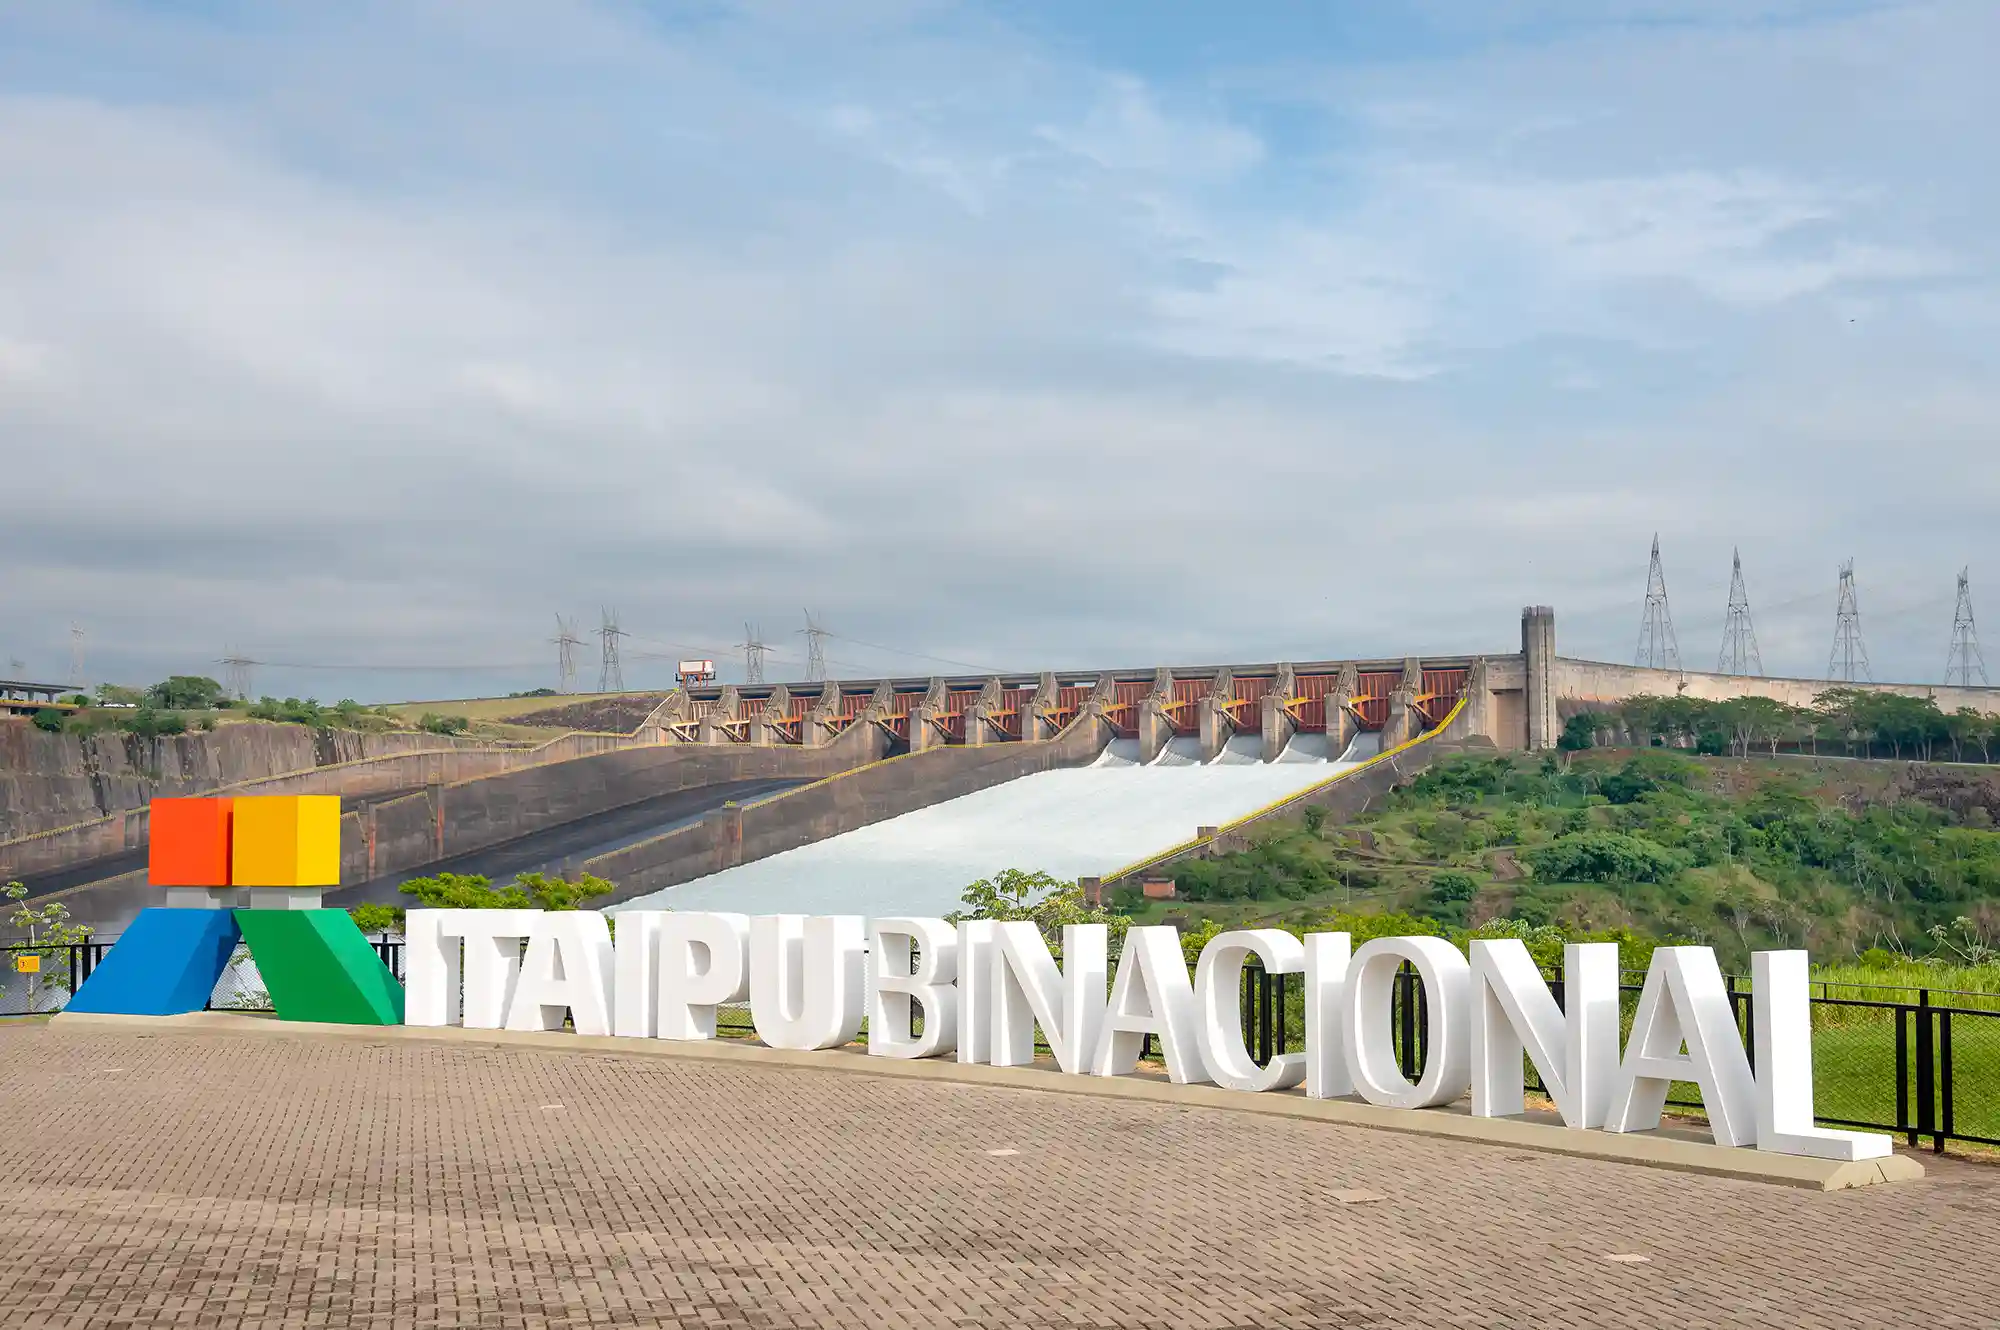 Sign showing the logo of the Itaipu Hydroelectric Plant, located in Foz do Iguaçu, with the open spillway in the background and cloudy sky.